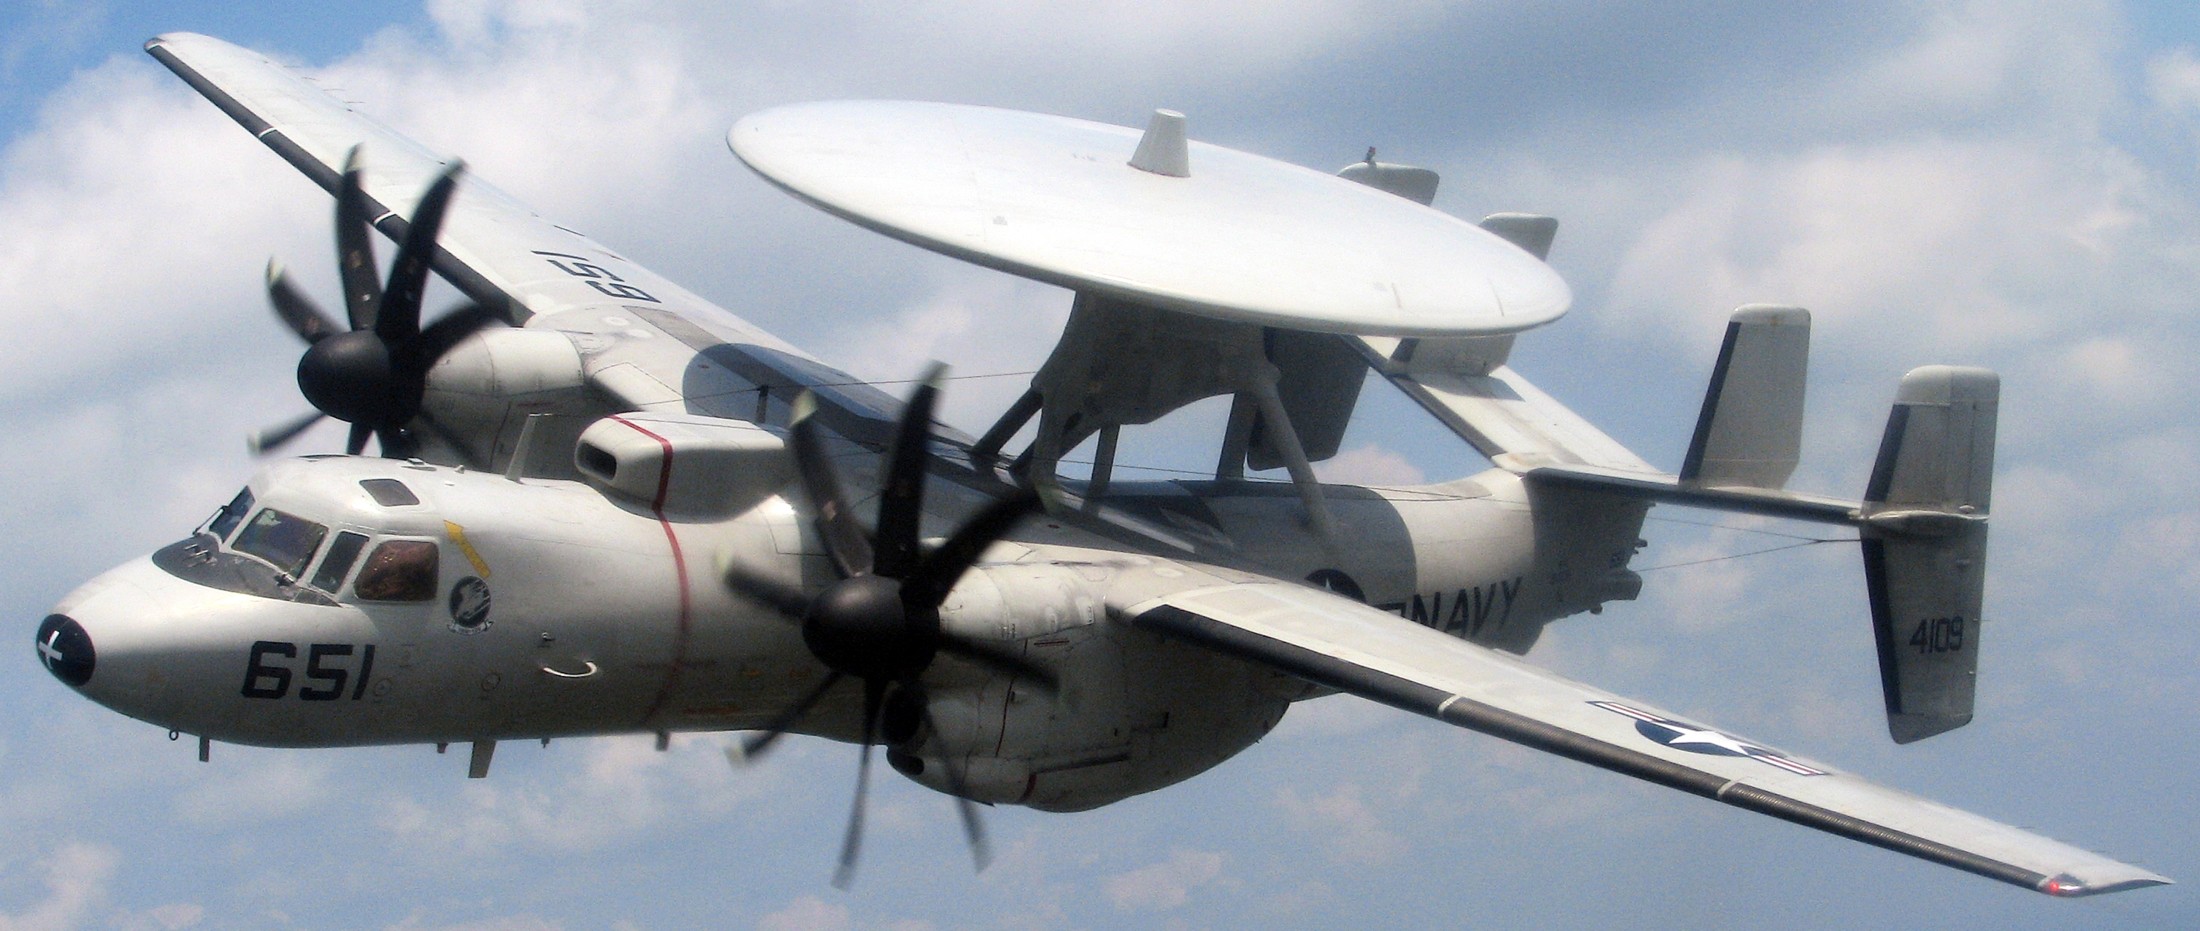 vaw-120 greyhawks carrier airborne early warning squadron e-2c hawkeye replacement nas jacksonville 102